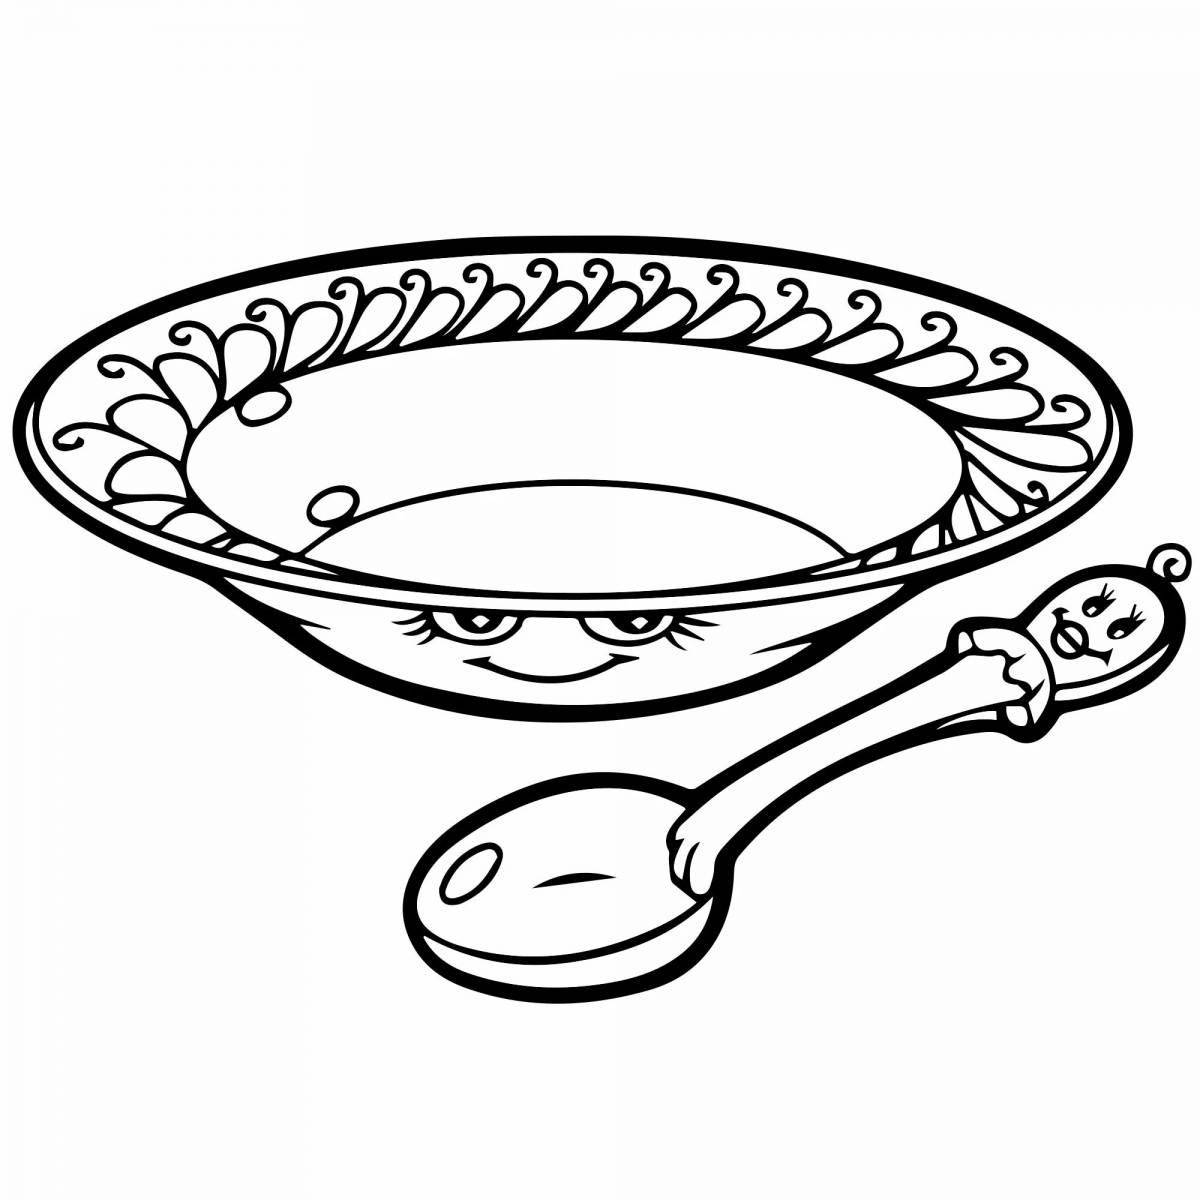 Glamorous bowl coloring book for kids